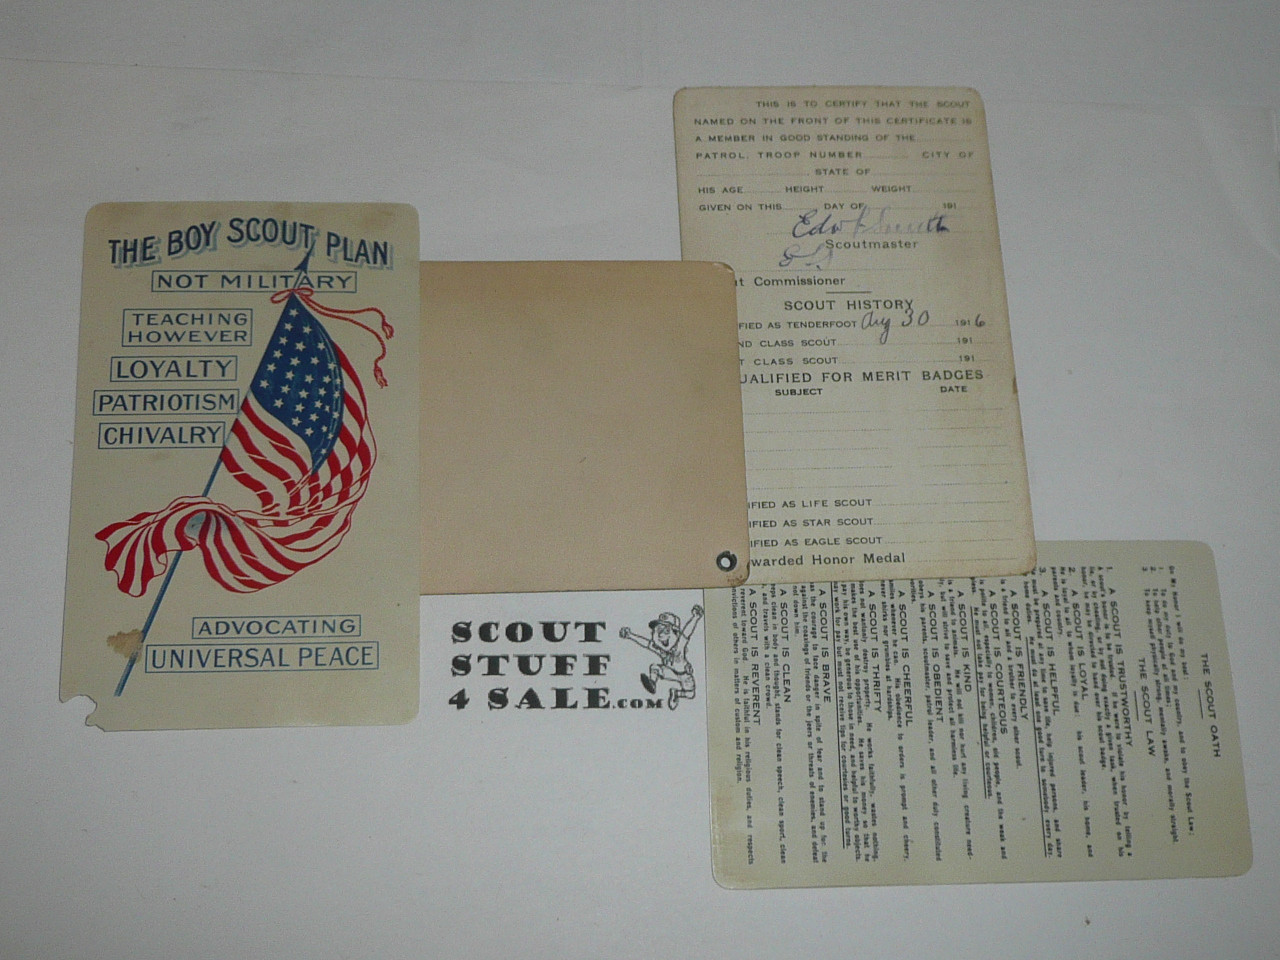 1917 Boy Scout Celluloid Membership Card, 6 signatures, 1917 series printed on card, expires February 1918, back cover separated, BSMC124